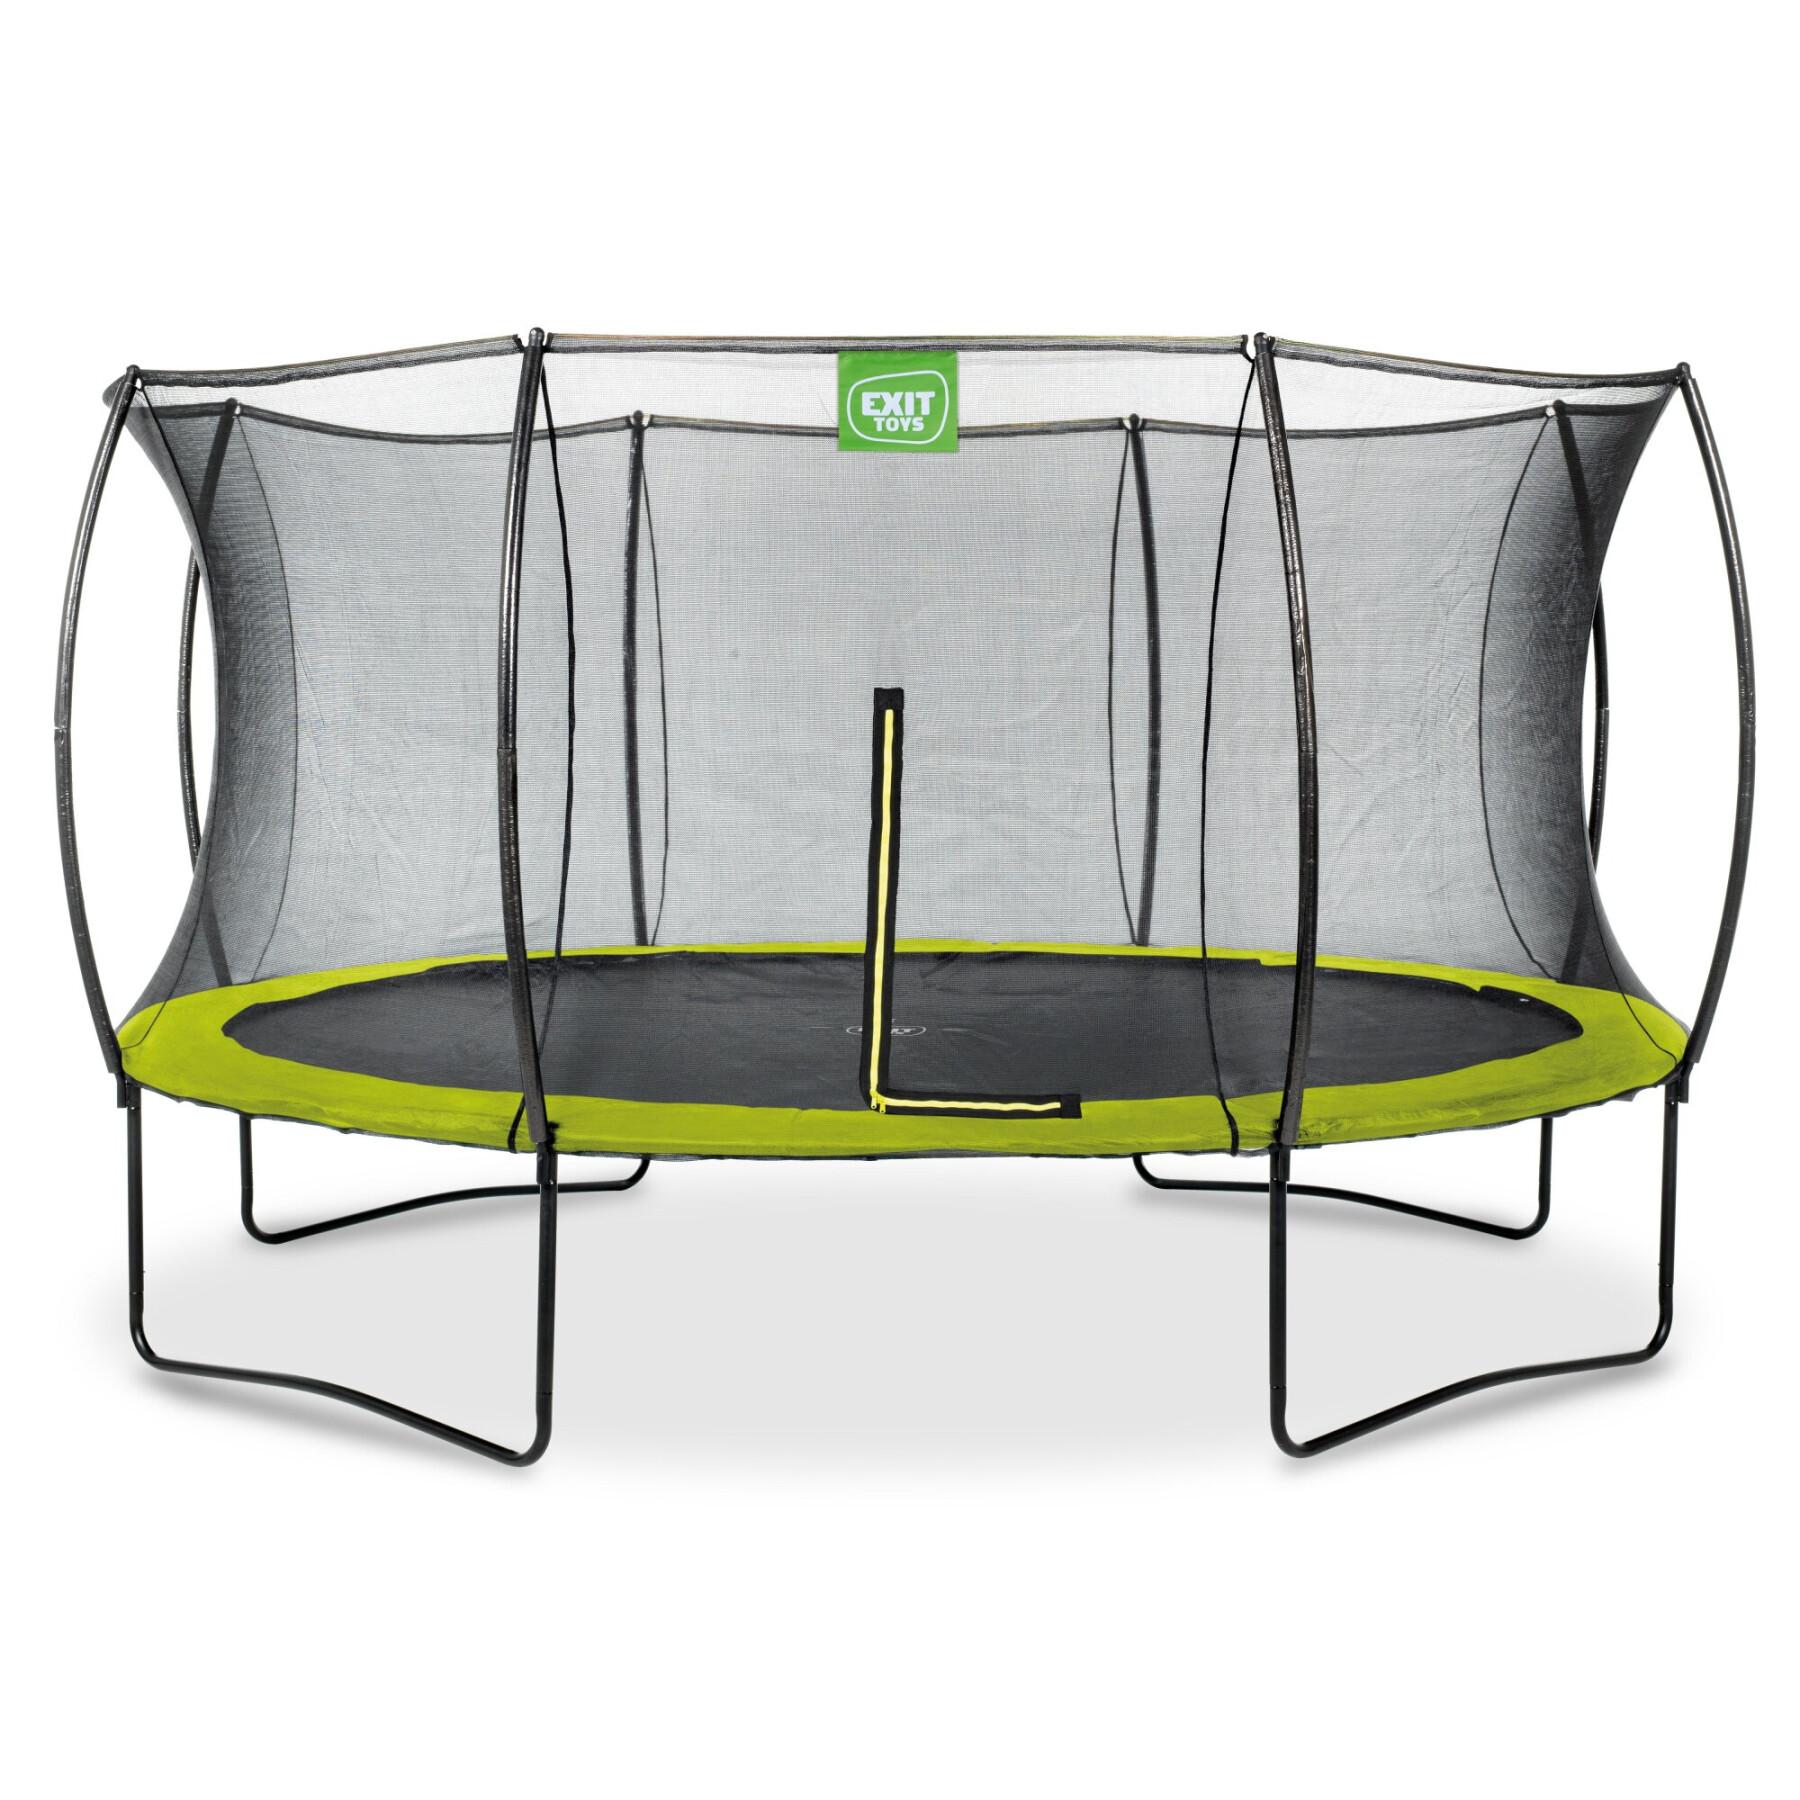 Trampolina Exit Toys Silhouette 427 cm